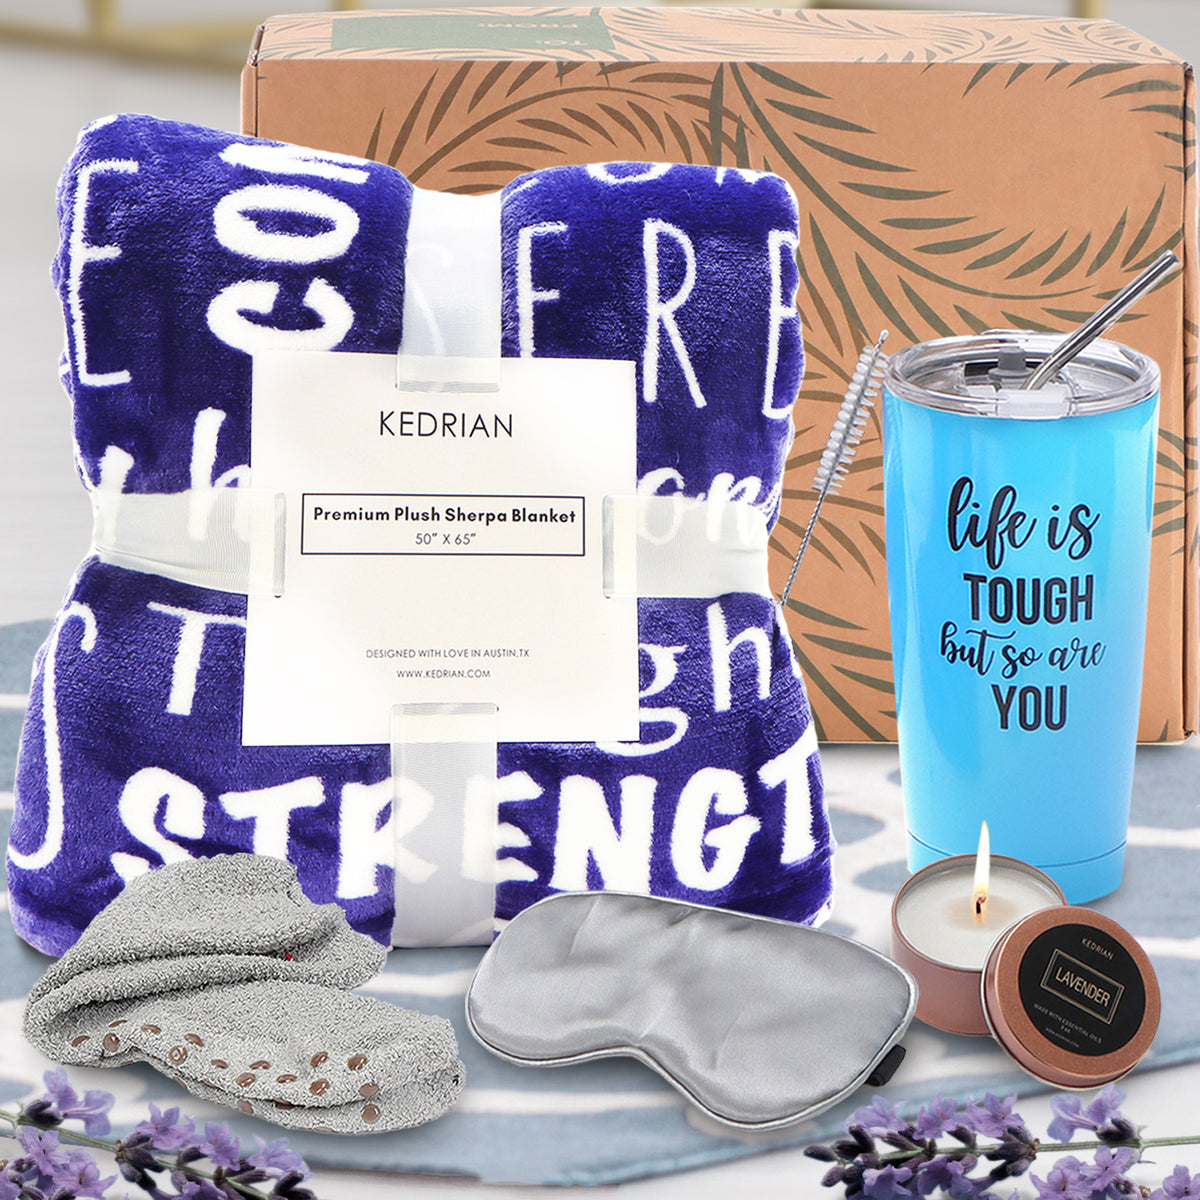 Care Package Gift Box – KEDRIAN